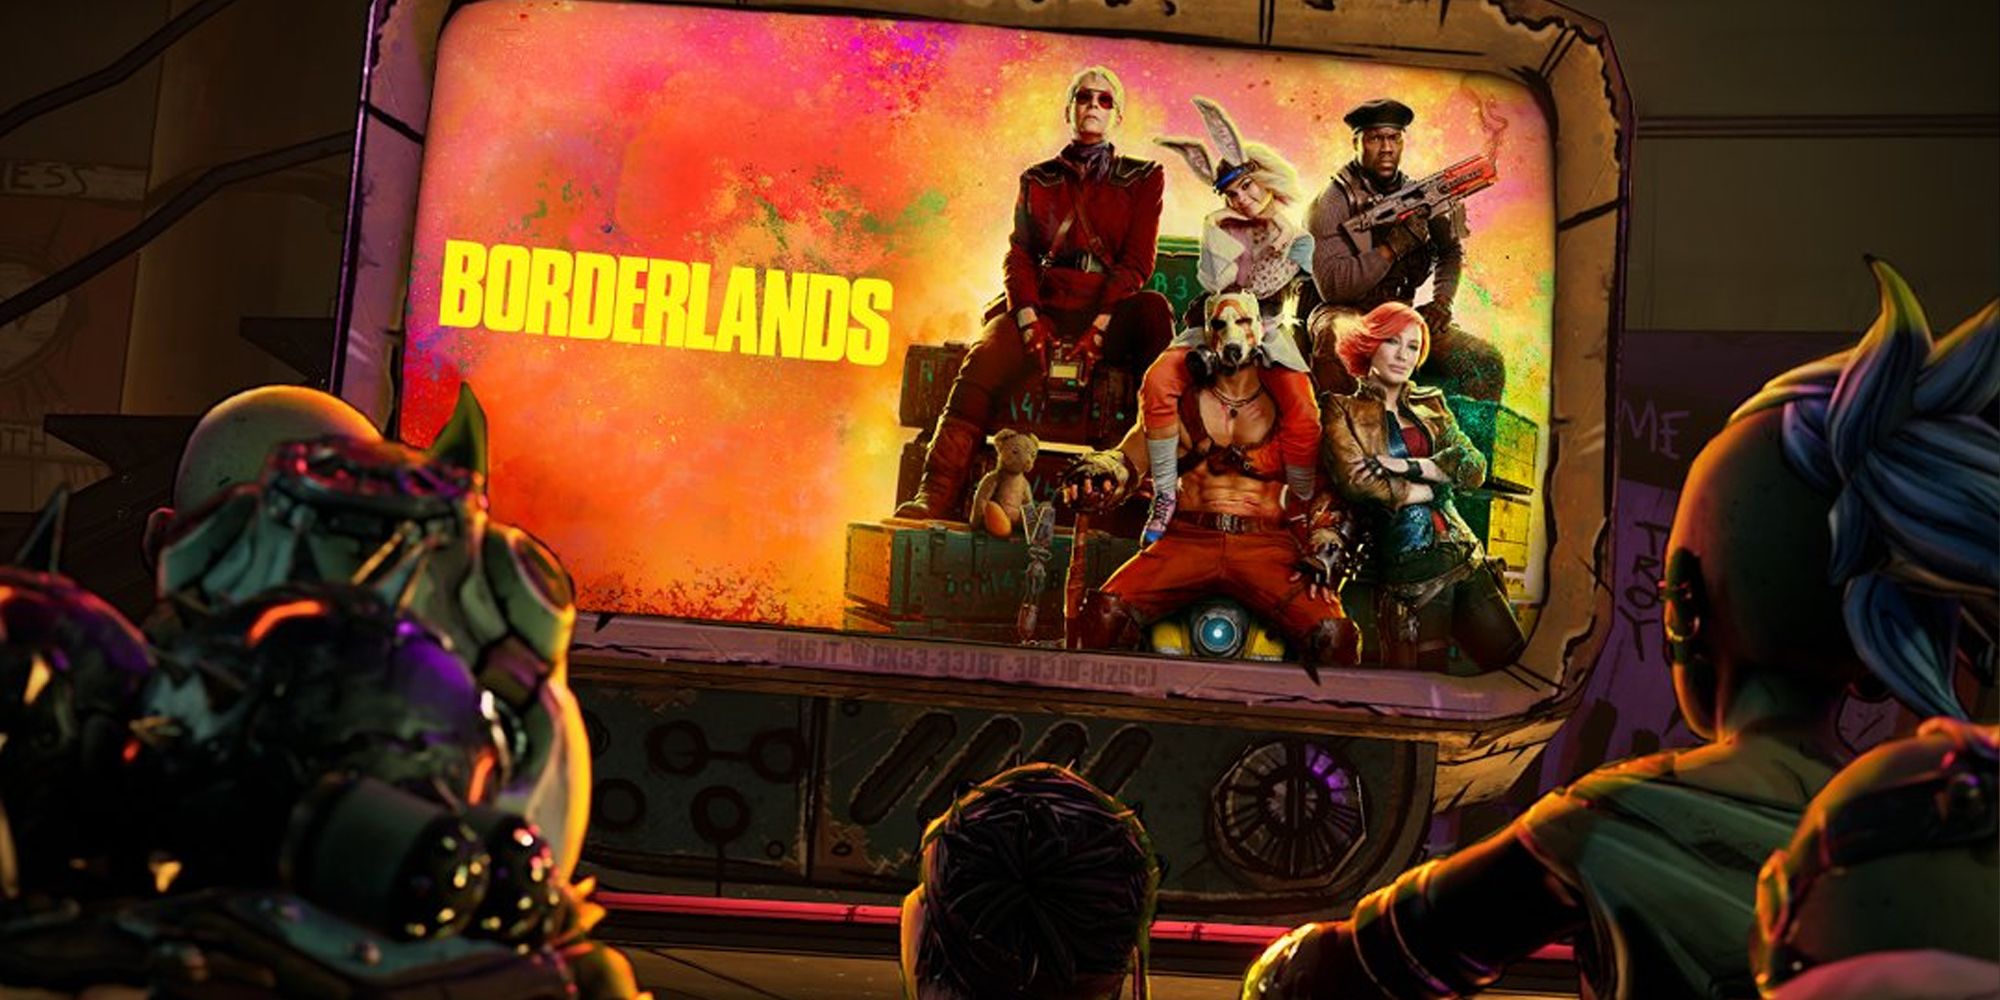 Borderlands characters gathering around to watch trailer